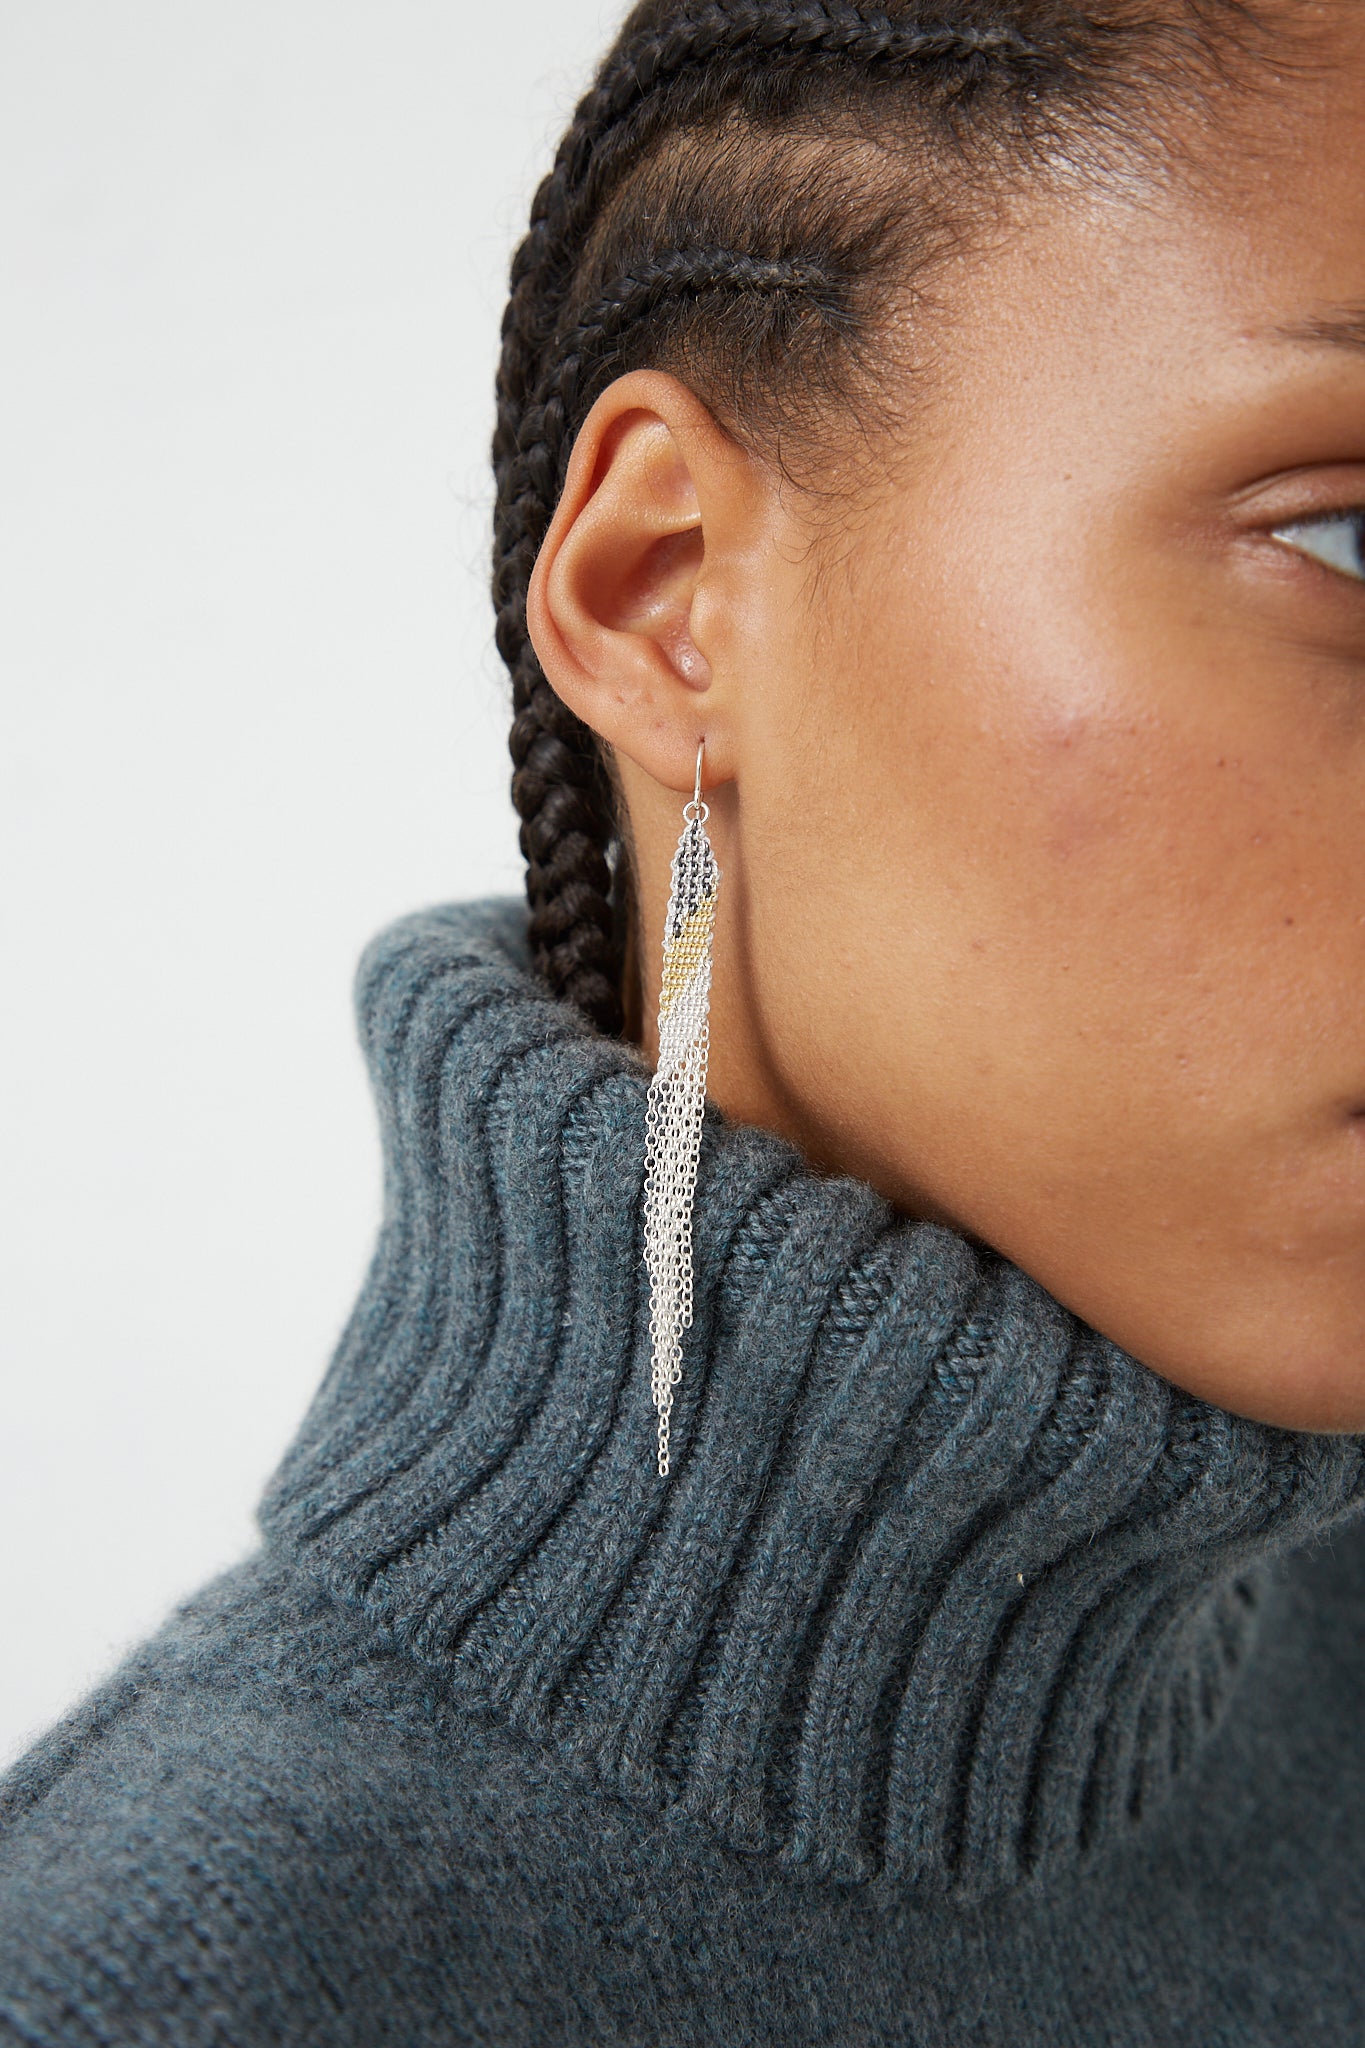 A woman wearing a grey sweater and Stephanie Schneider's Sterling Silver Earrings in Silver Oxidized and Gold-Plated Silk.